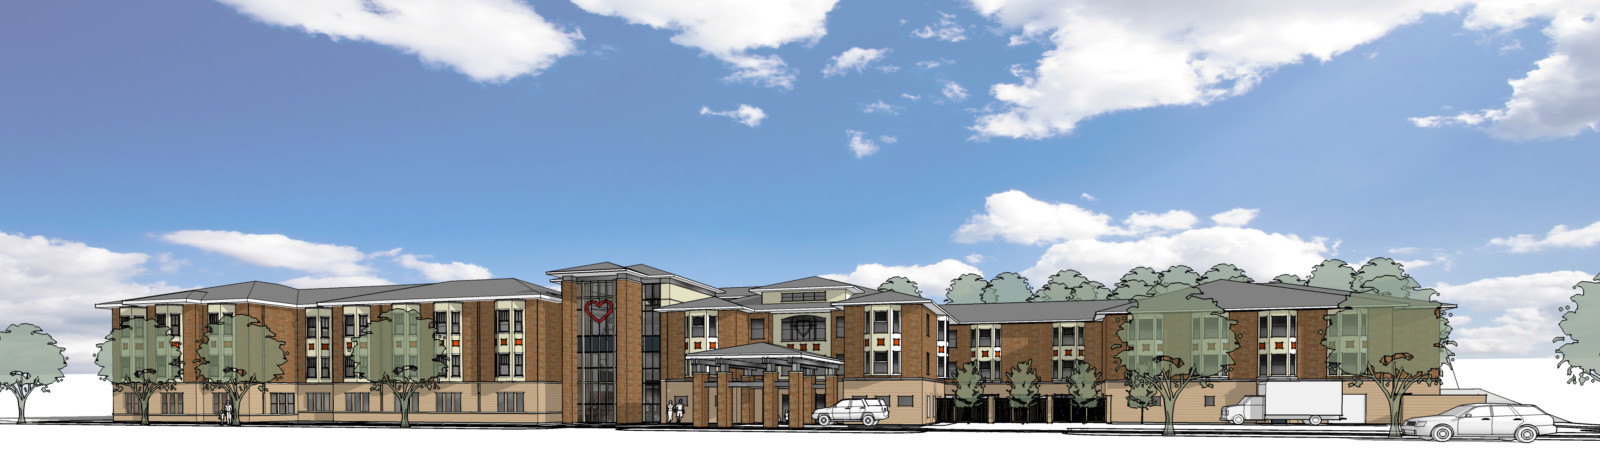 Ronald McDonald House of Rochester MN Outside Expansion Drawing